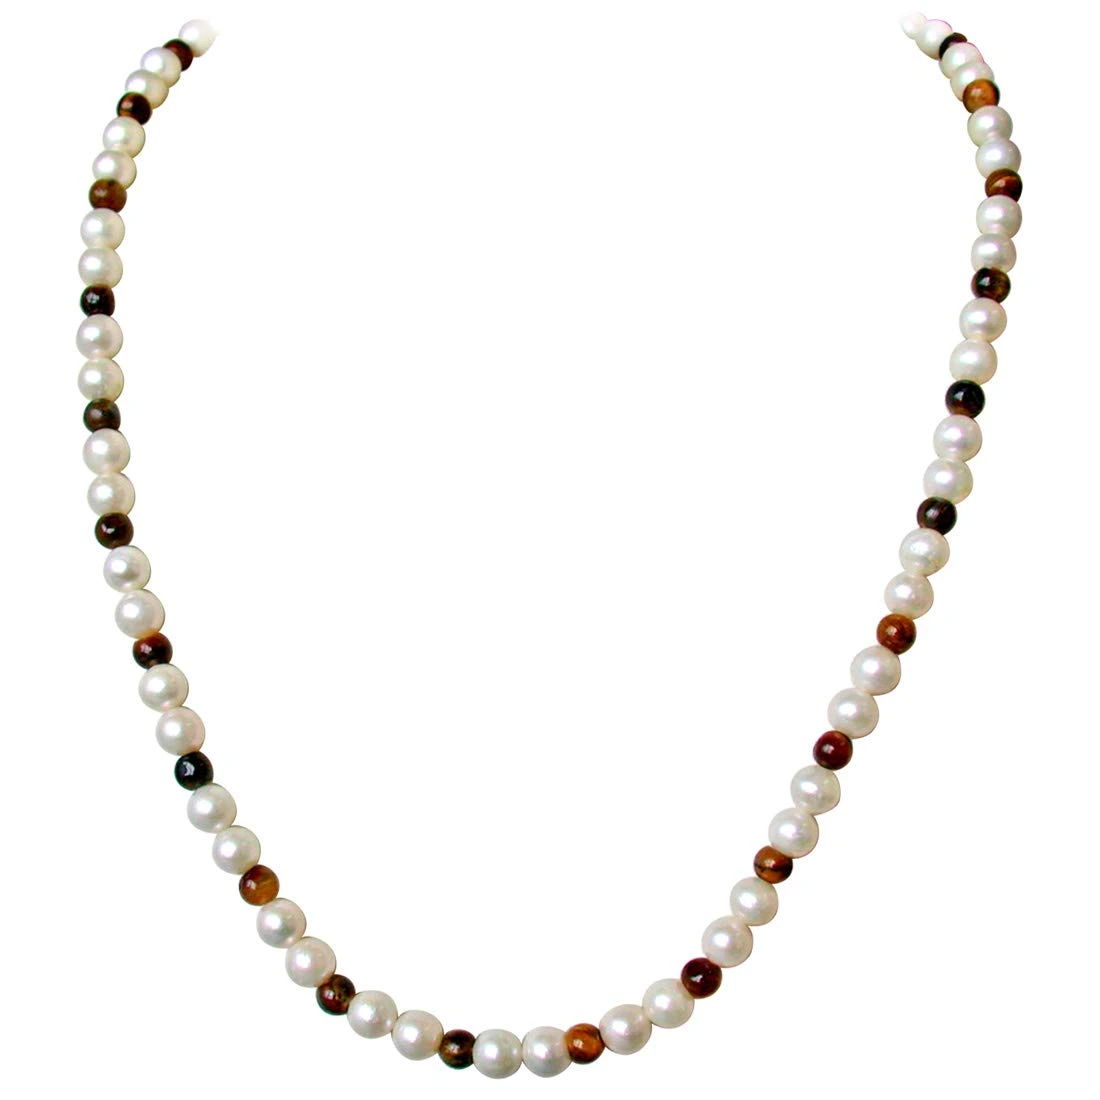 Dandy - Single Line Real Freshwater Pearl & Tiger Eye Beads Necklace for Women (SN14)